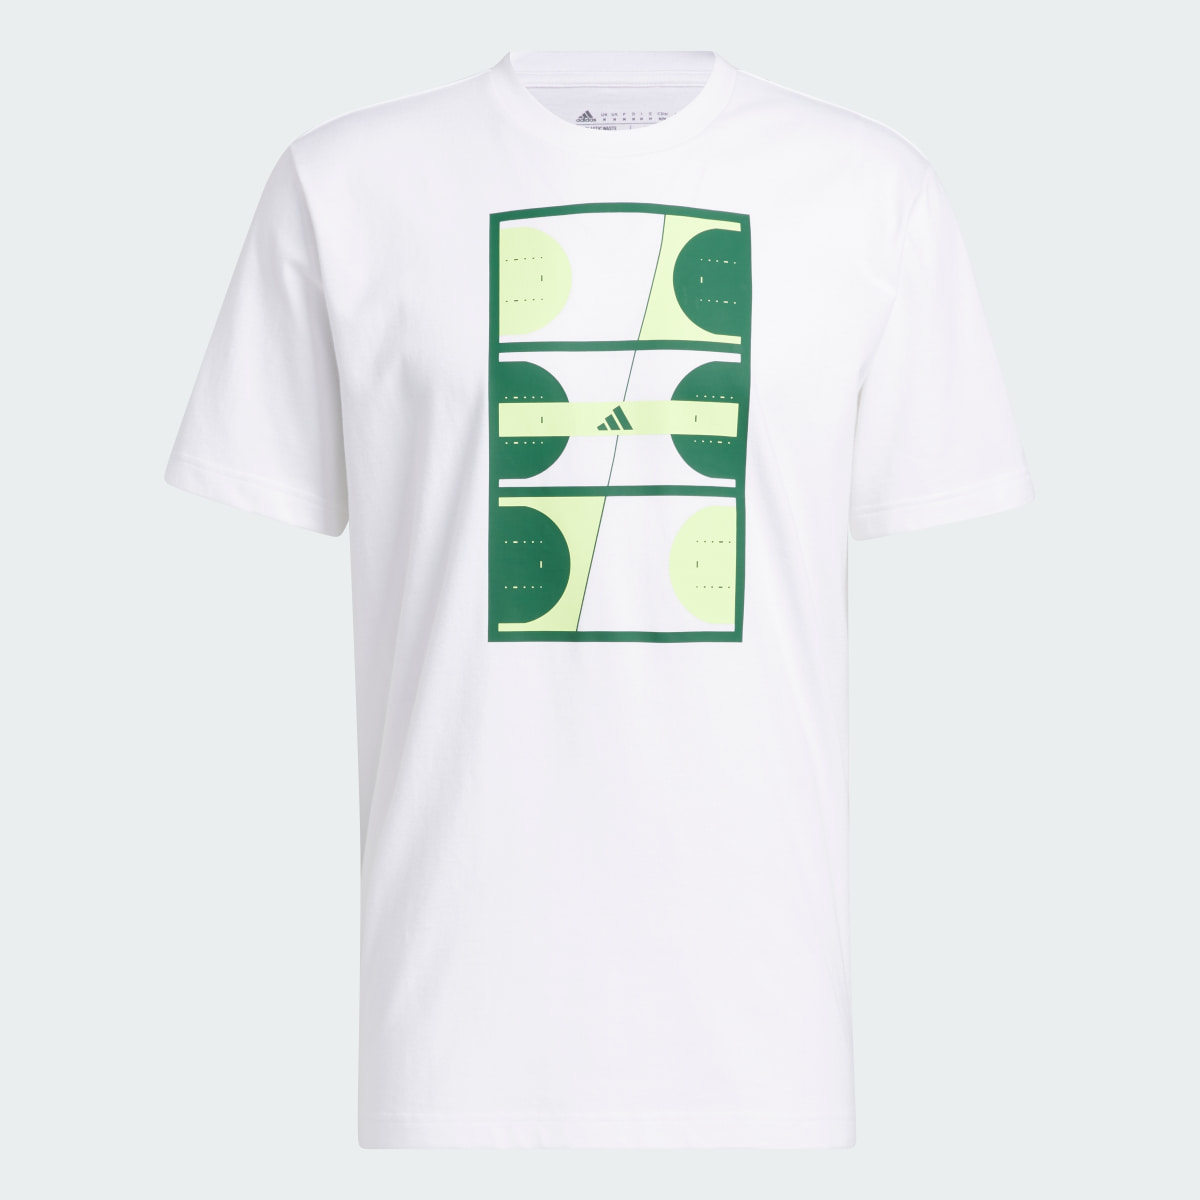 Adidas Global Courts Graphic Tee. 5